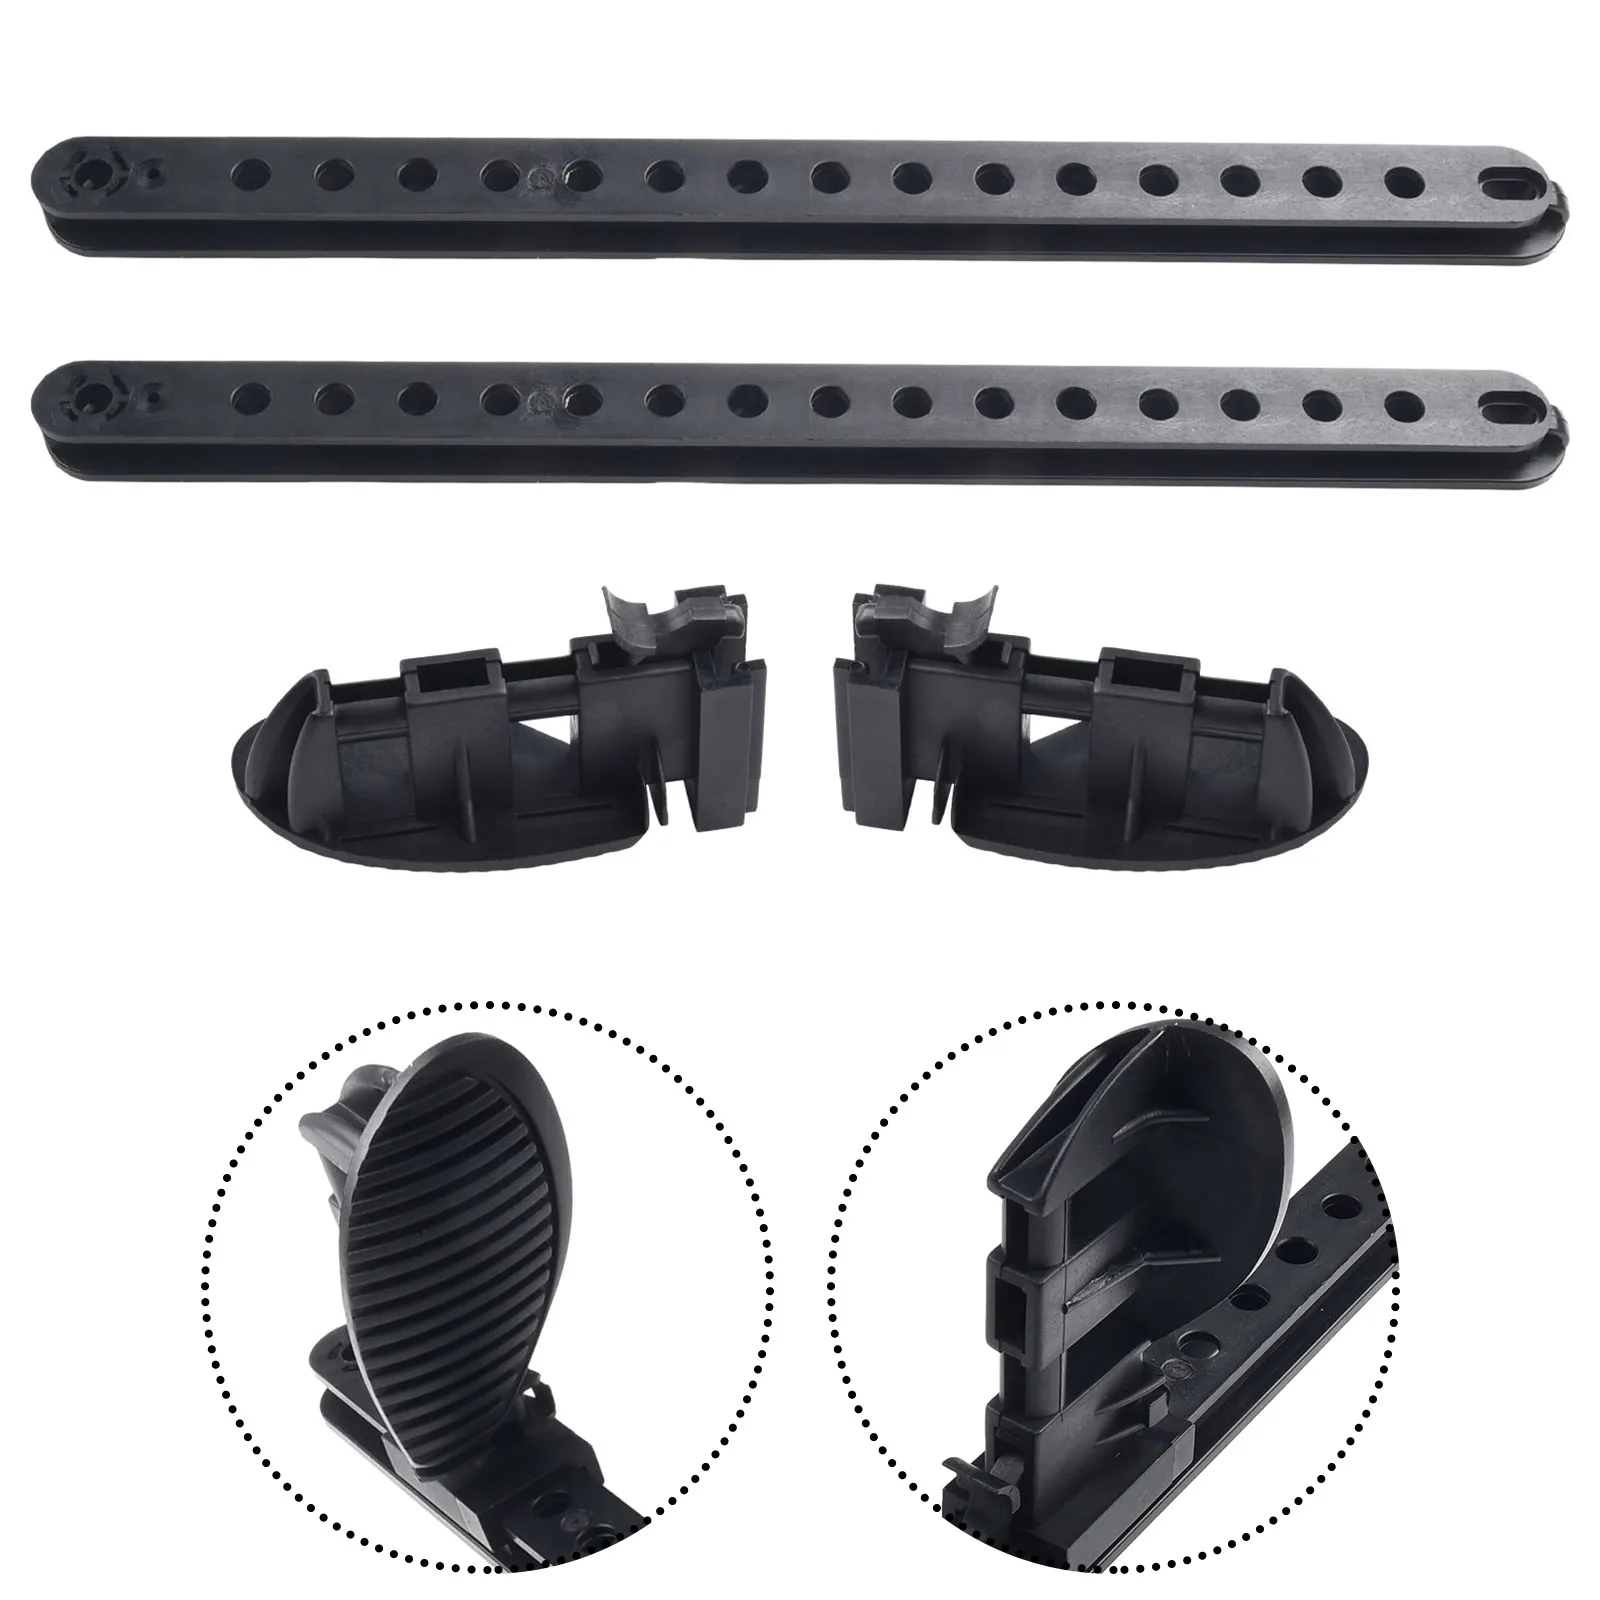 

1pair 41.5 Cm / 16.3 Inches Accessories Adjustable Canoe Foot Peg Rest High Quality Kayak Locking Ship Plastic